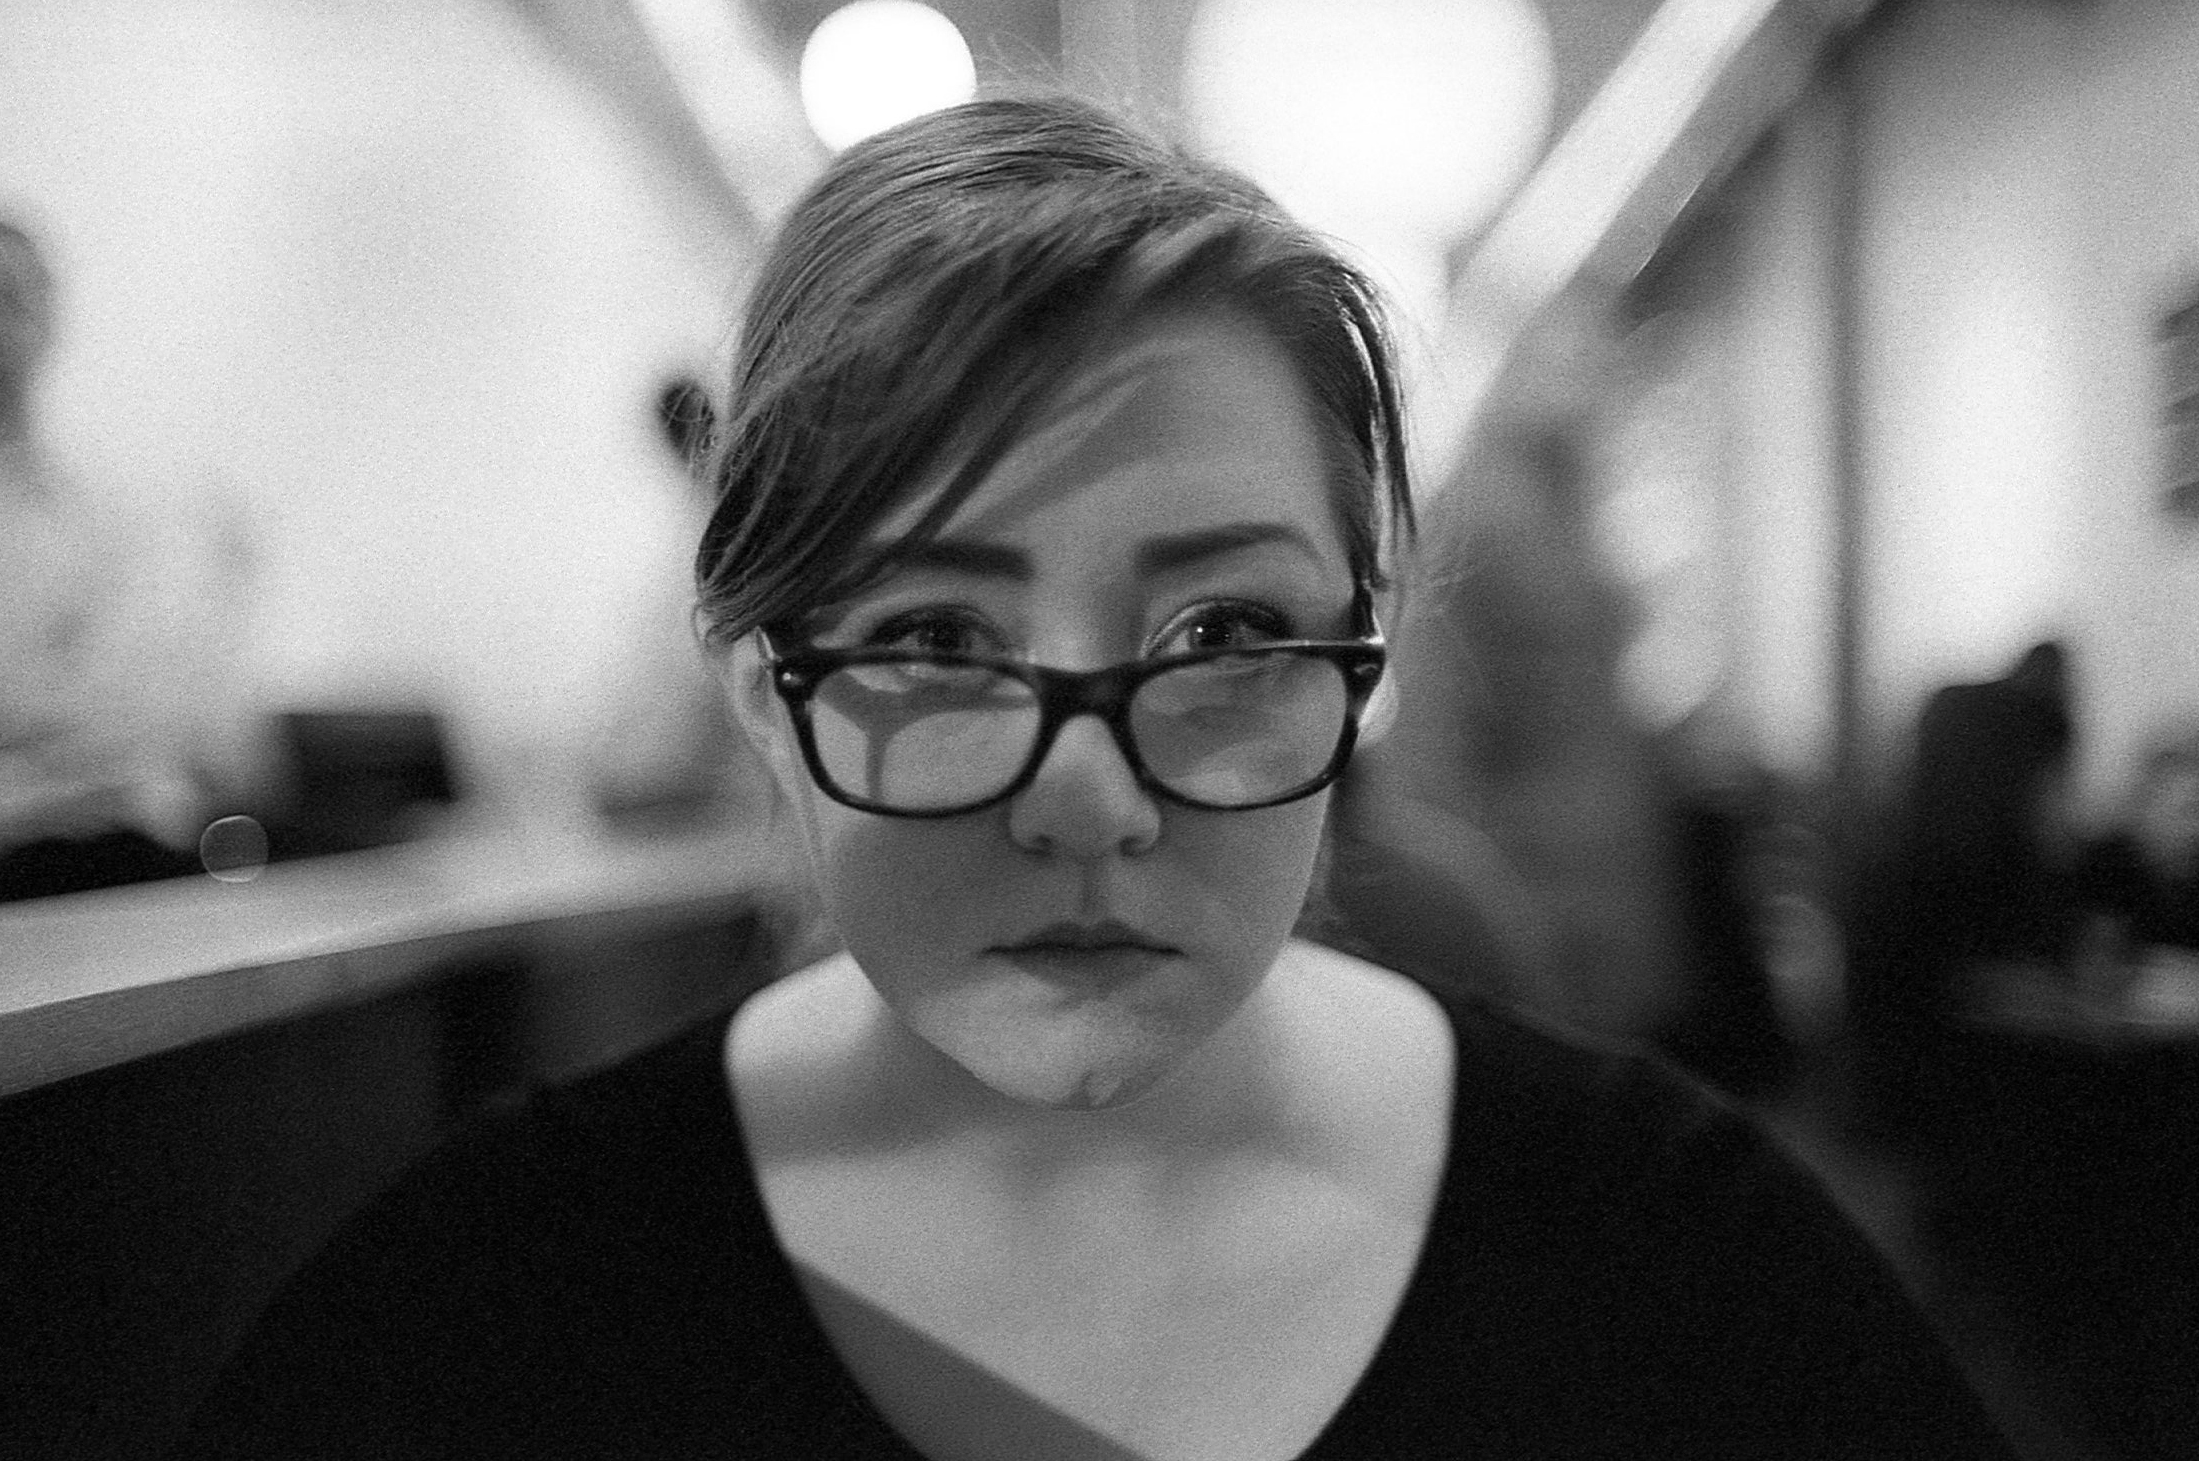 a black and white image of a woman wearing glasses